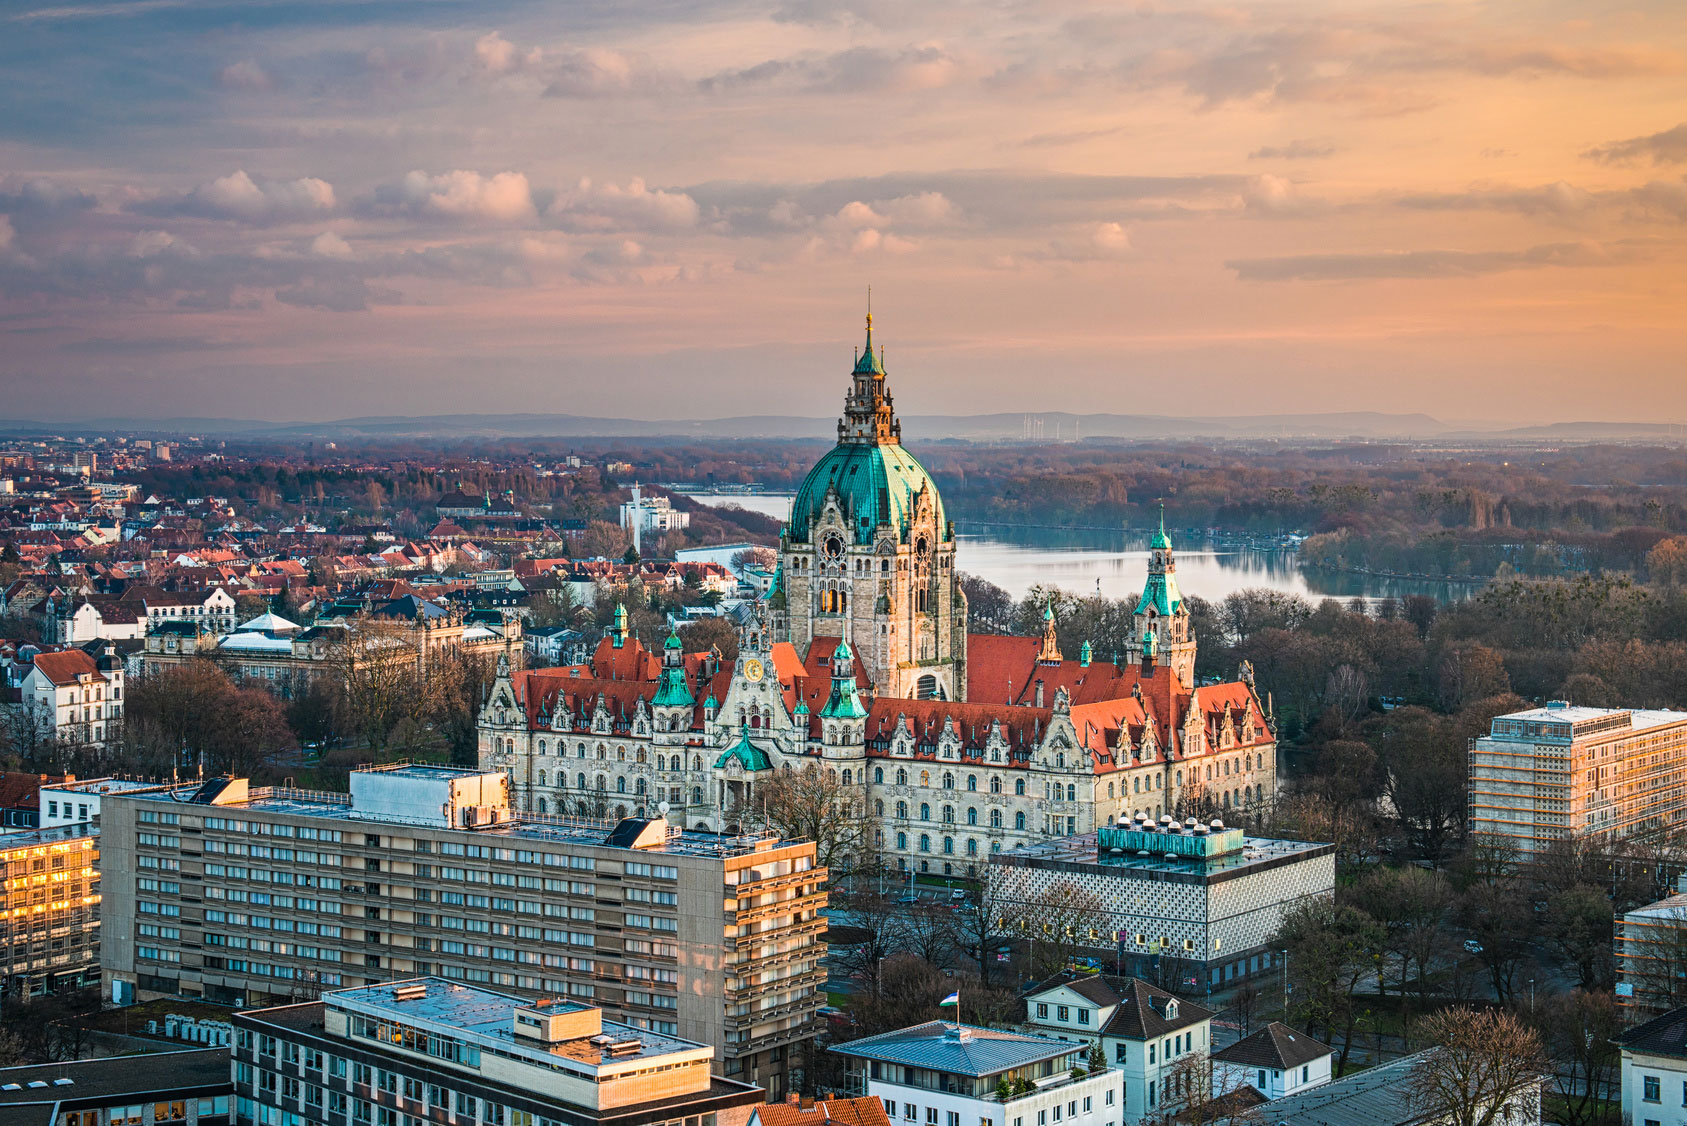 Overview of the whole city of Hanover with the city hall, lake and church